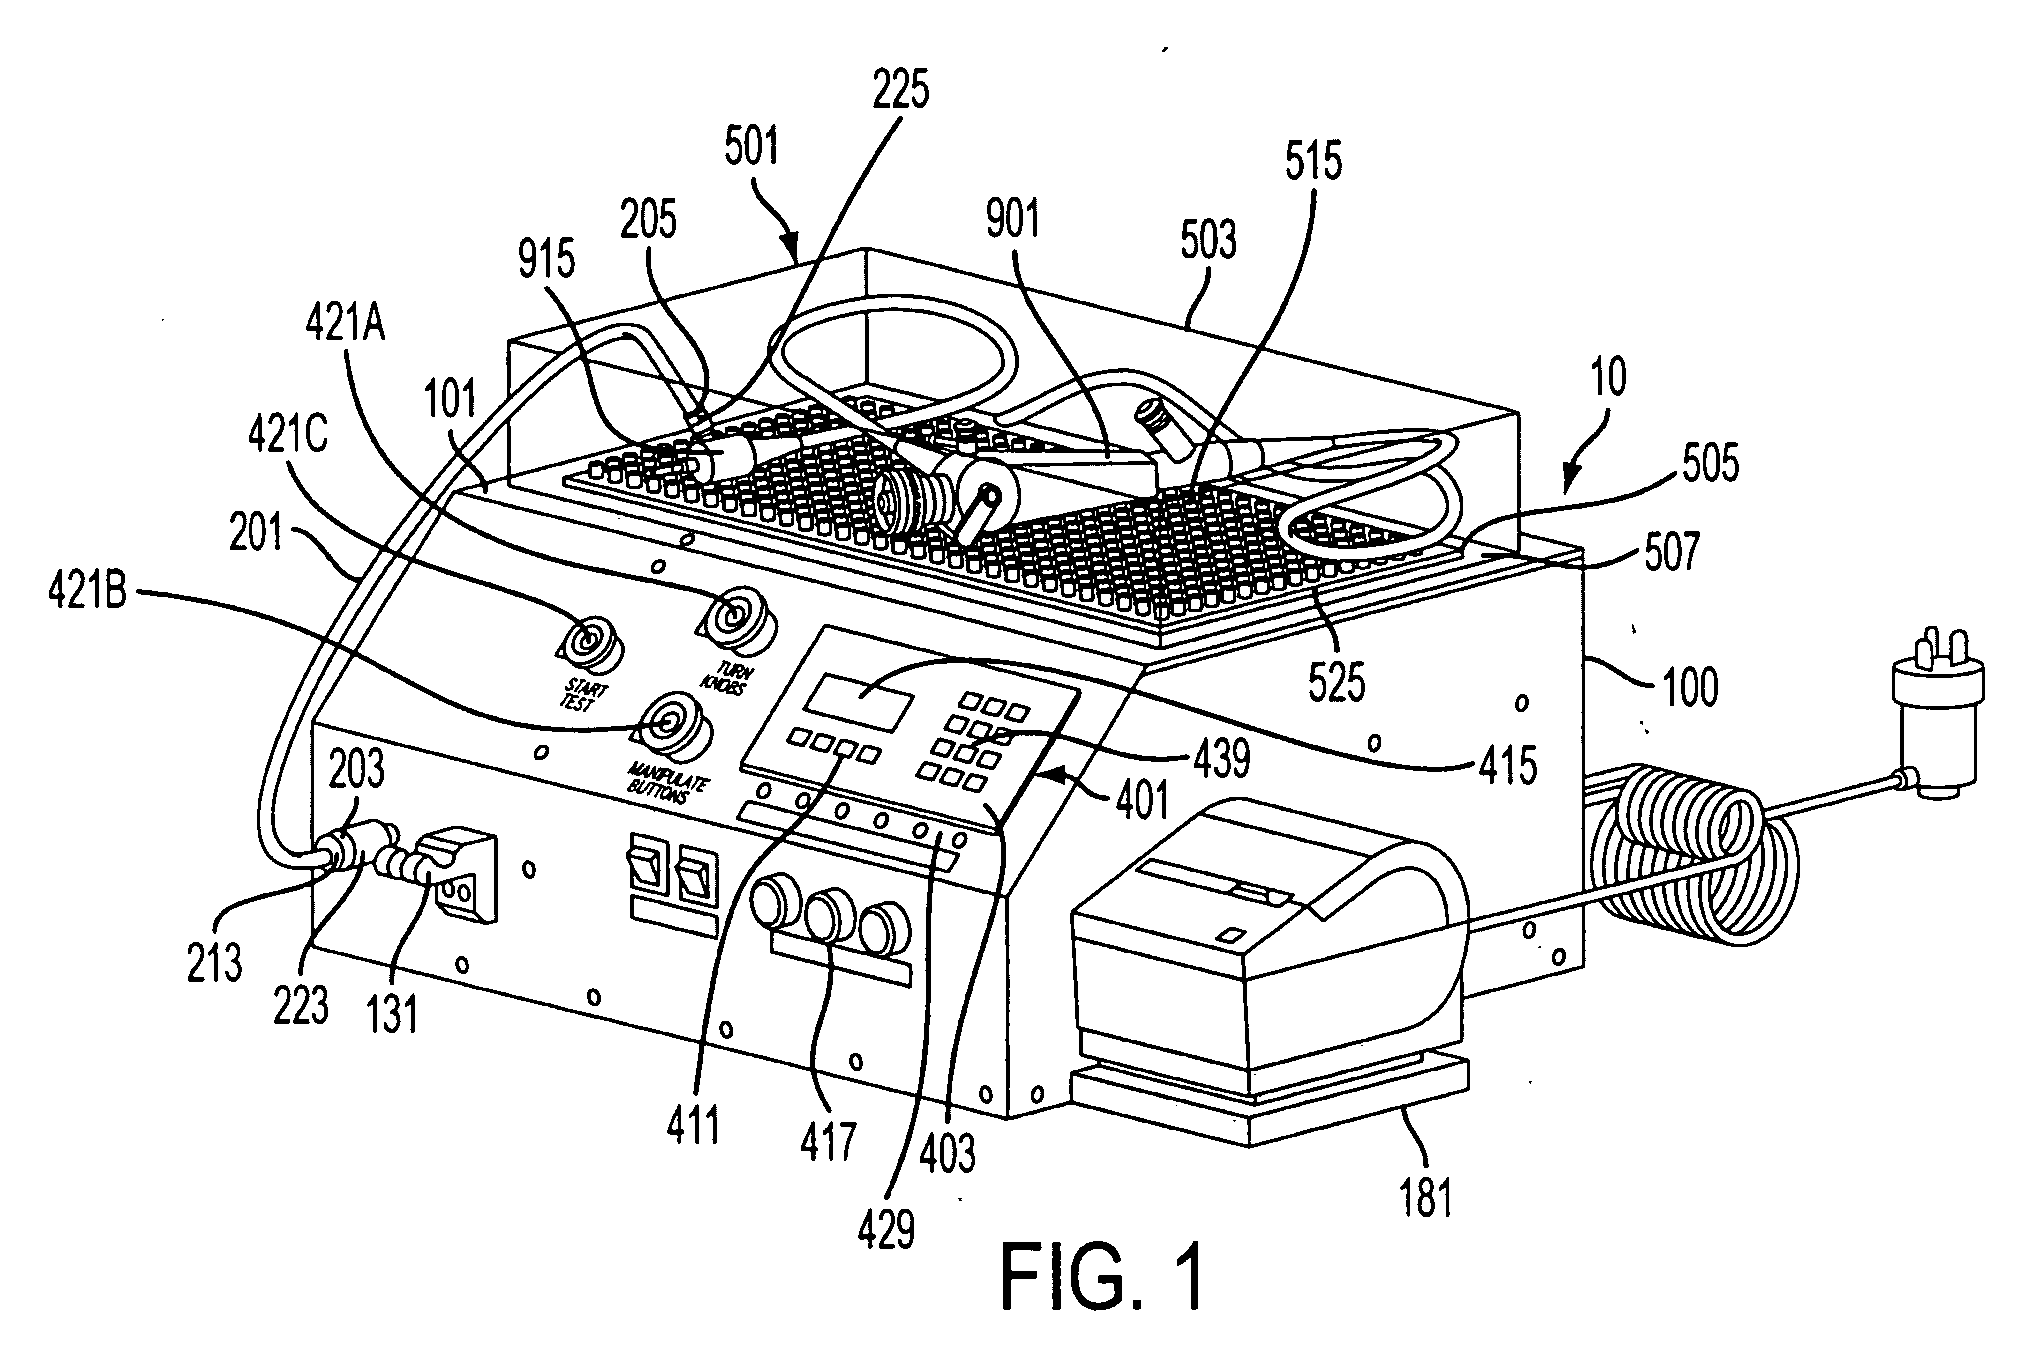 Systems and methods for endoscope integrity testing